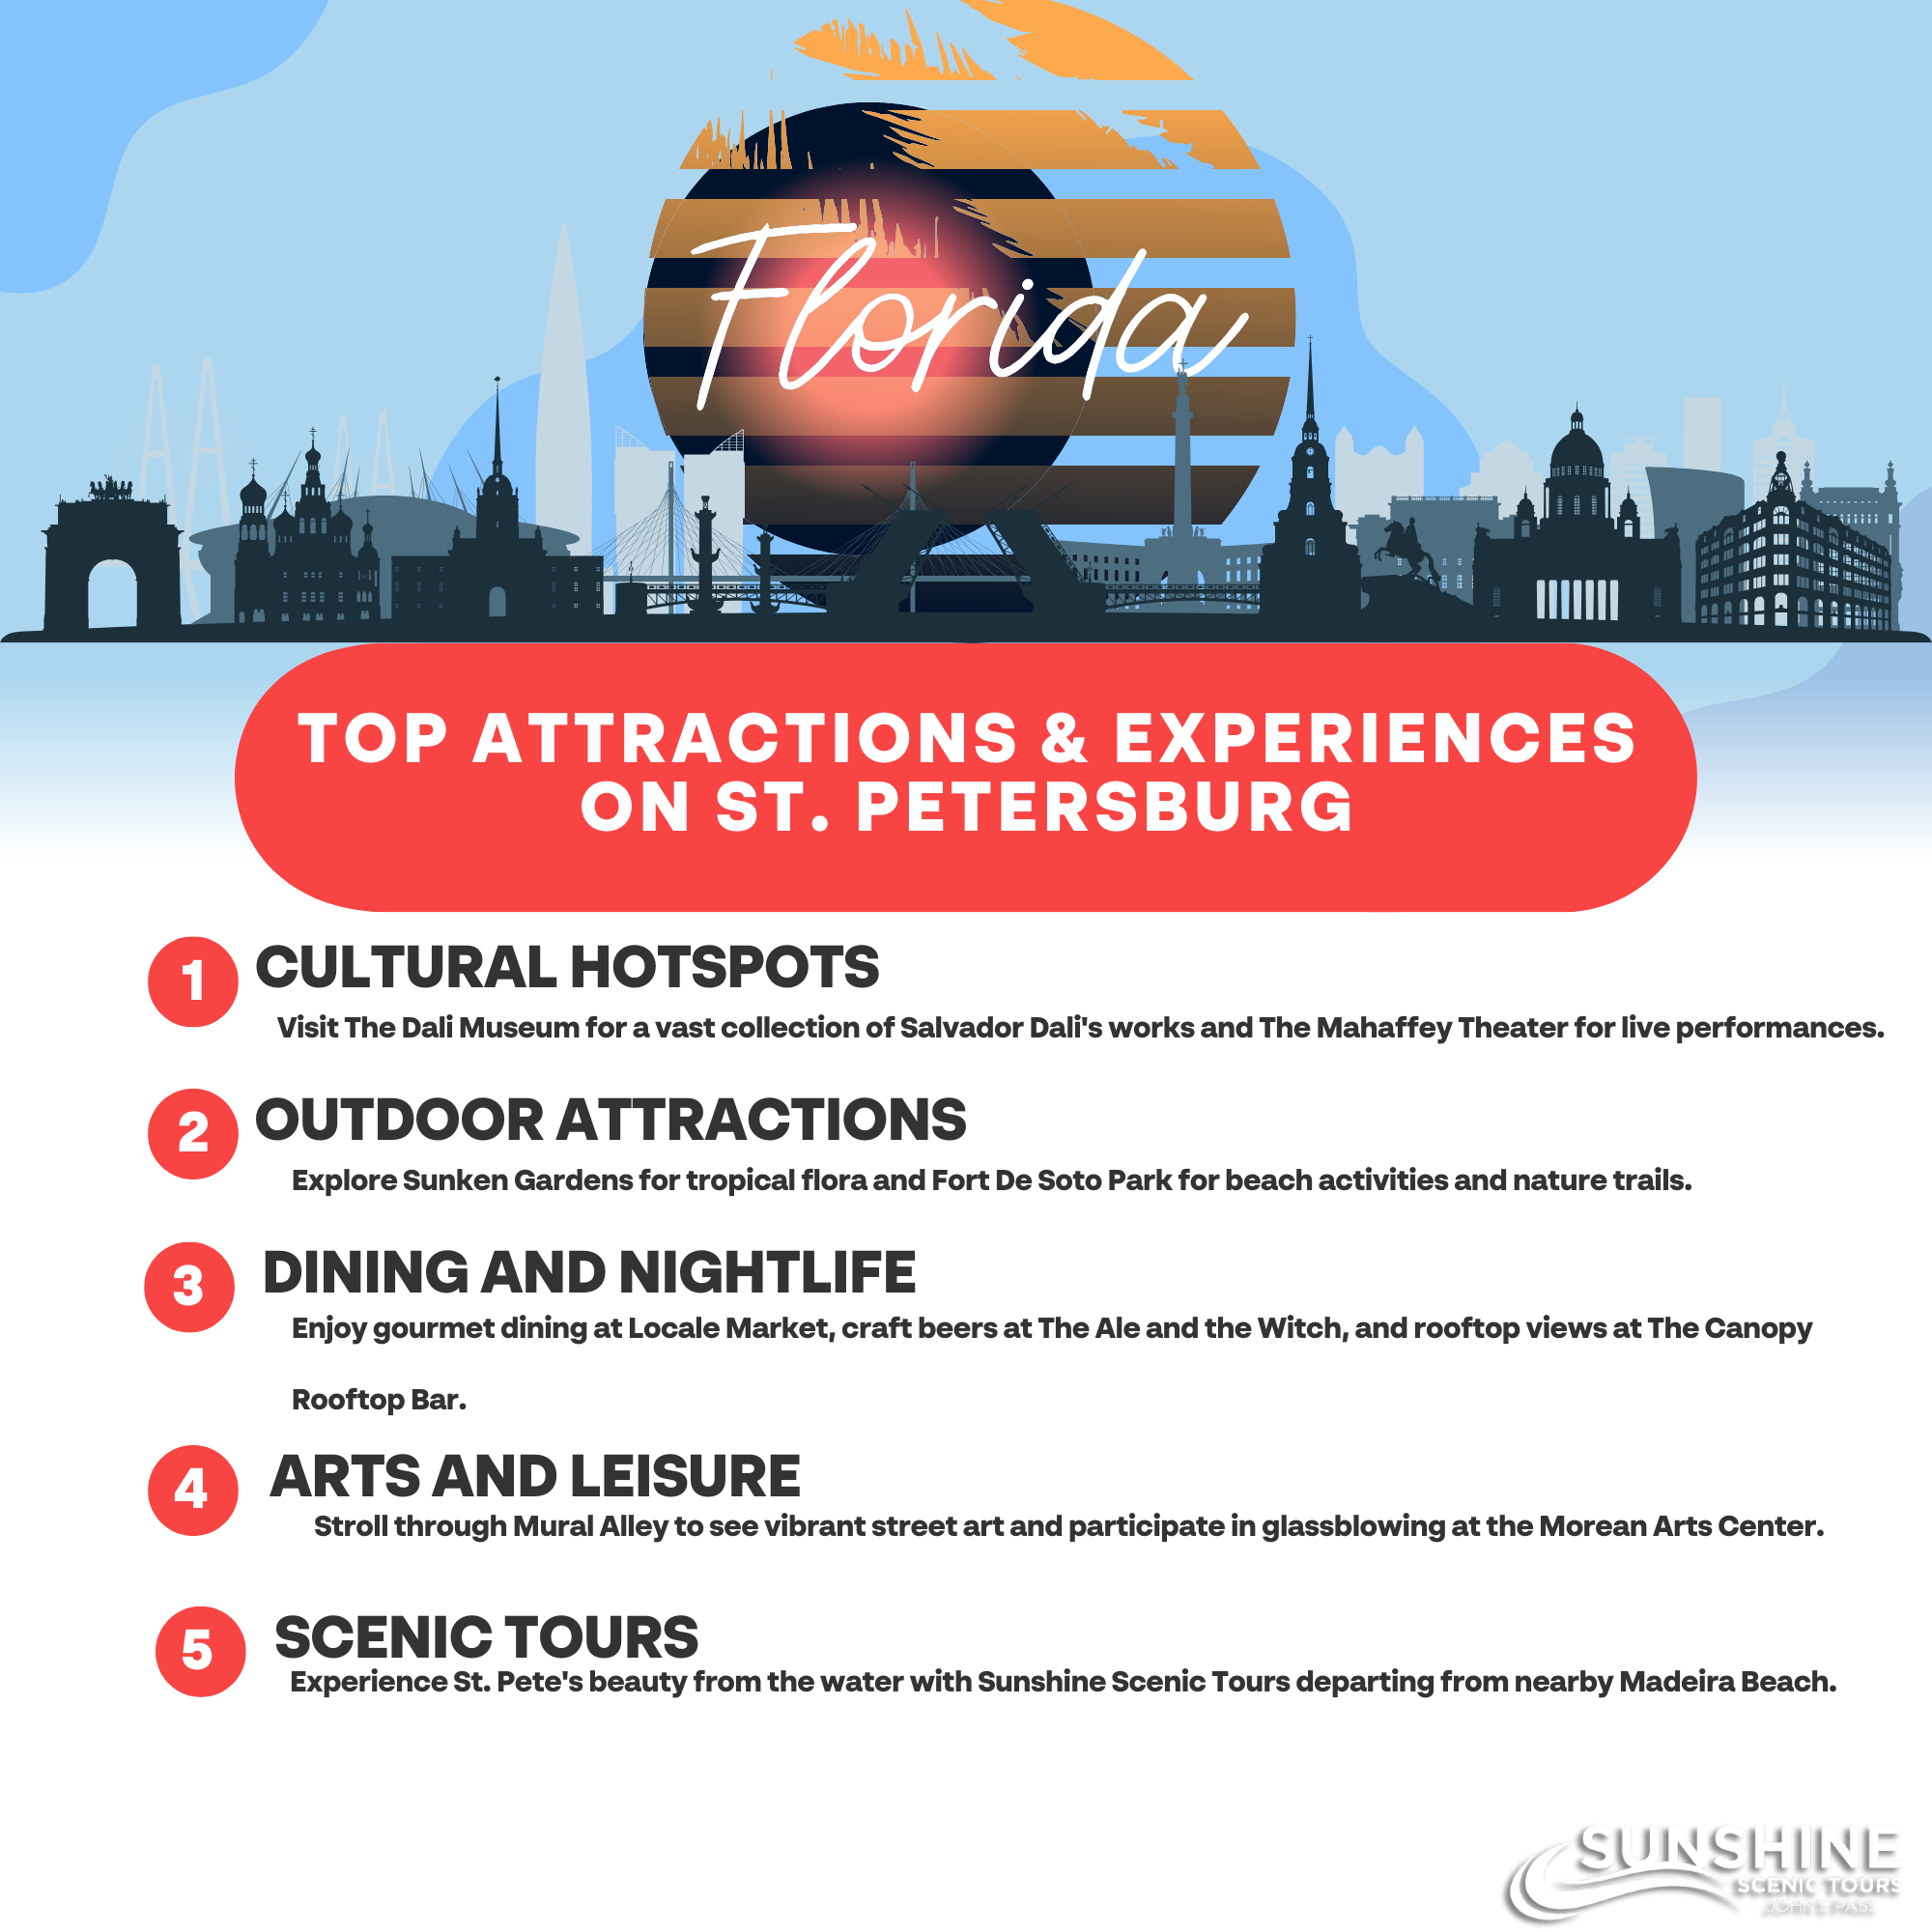 Top Attractions & Experiences on St. Petersburg
